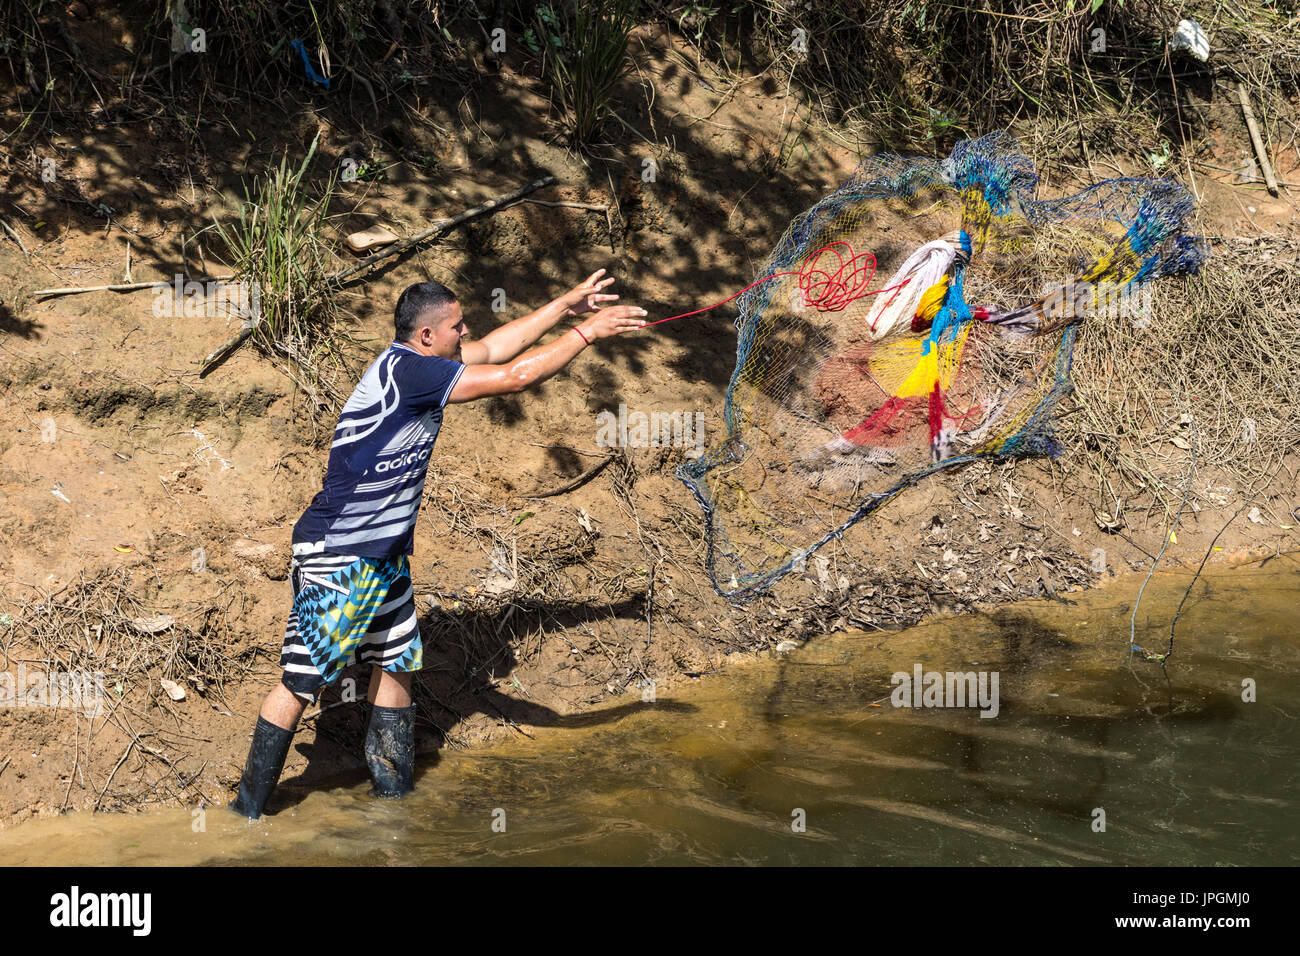 A young man fishing with a net in a lake. Colombia, South America. Stock Photo